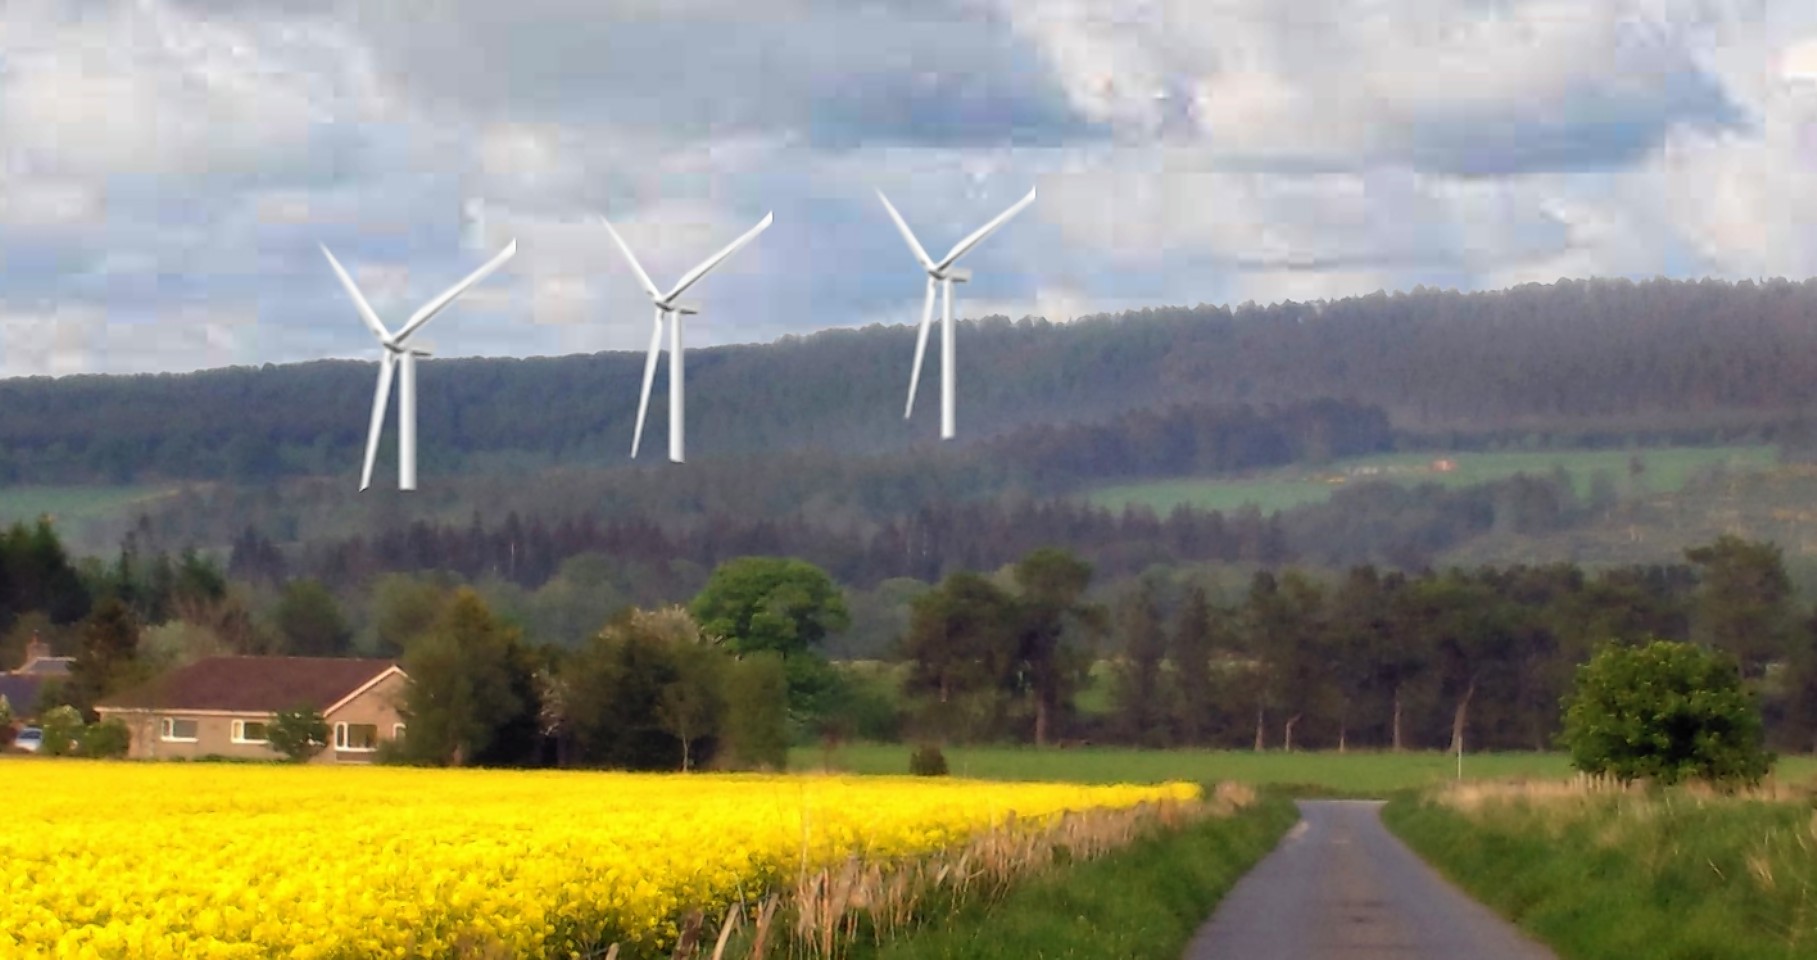 New map shows impact of wind turbines on north-east.